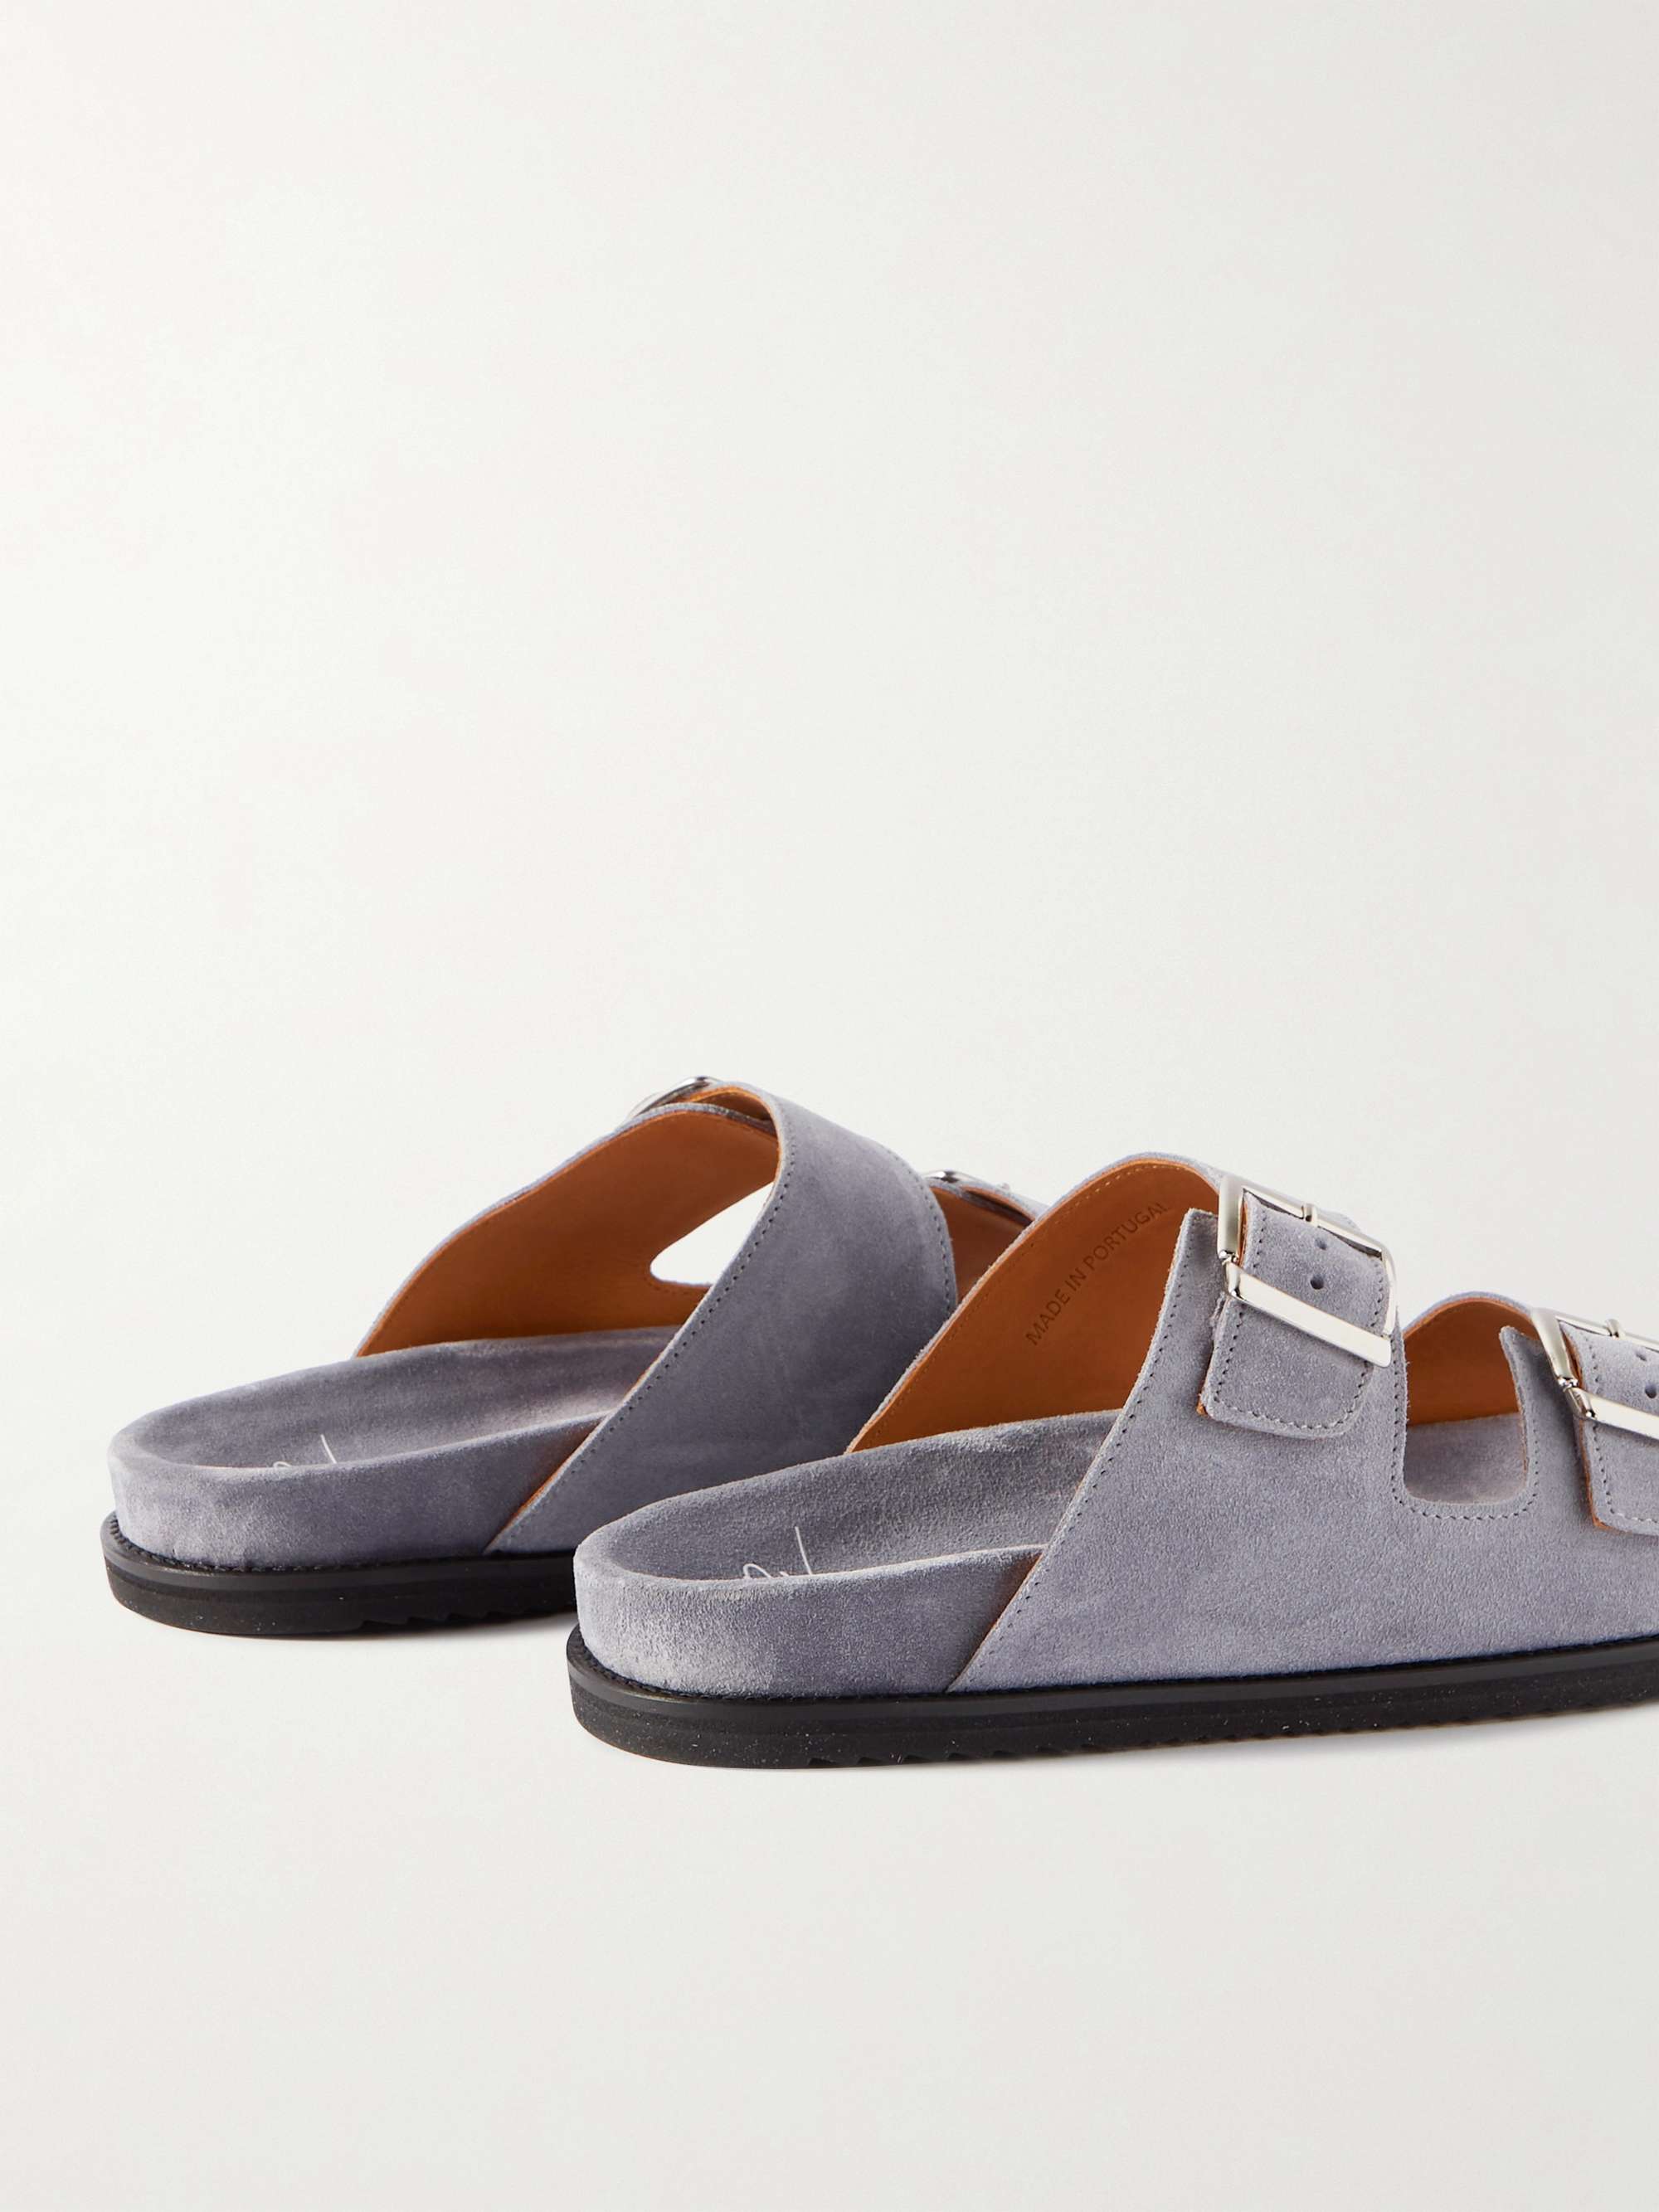 MR P. David Regenerated Suede by evolo® Sandals